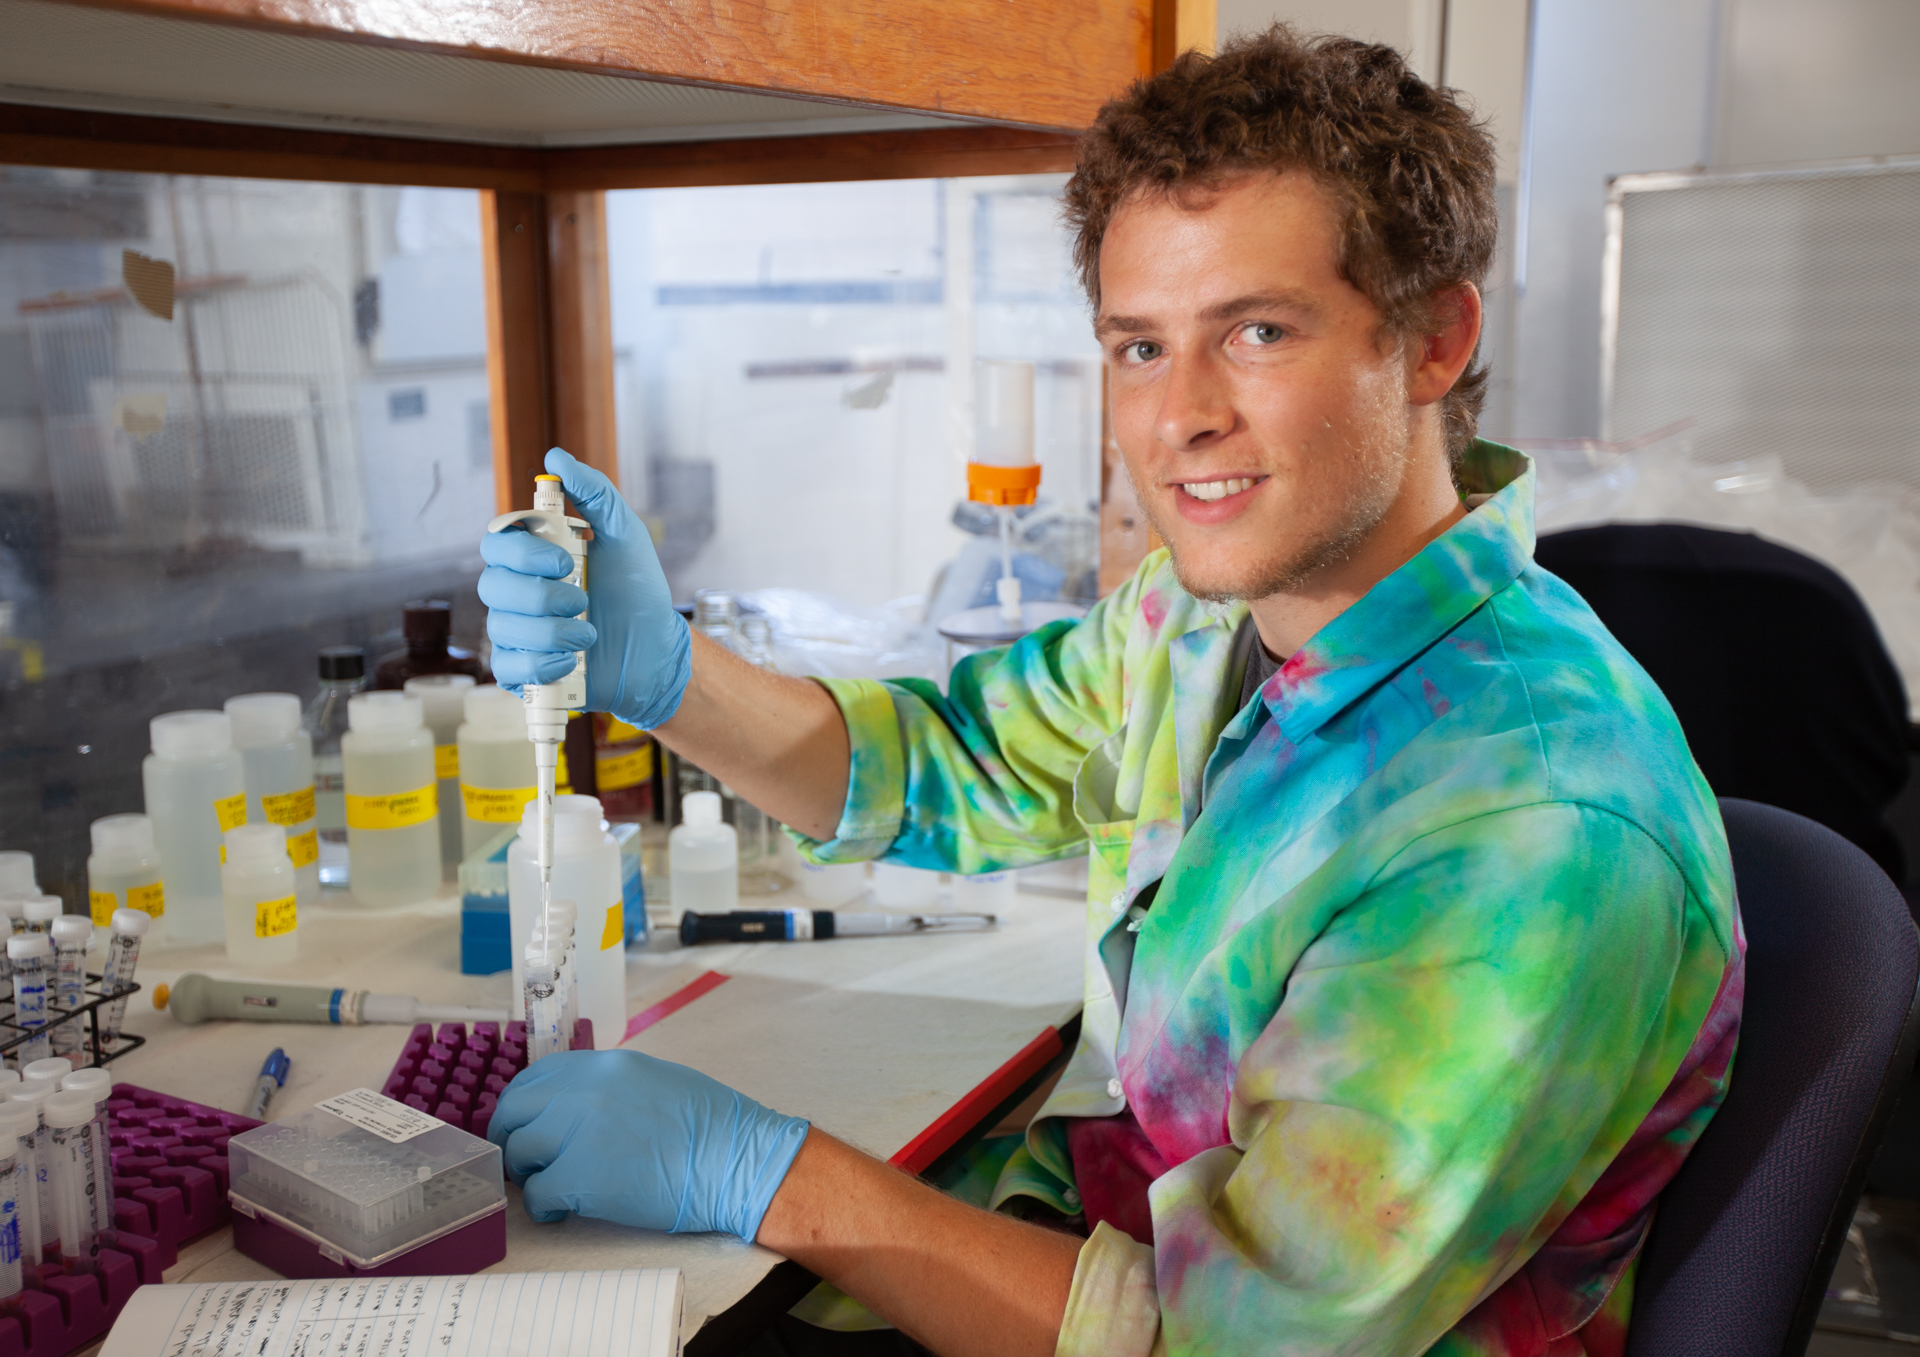 A student wearing a tie-dyed lab coat uses a pipette to fill test tubes with samples